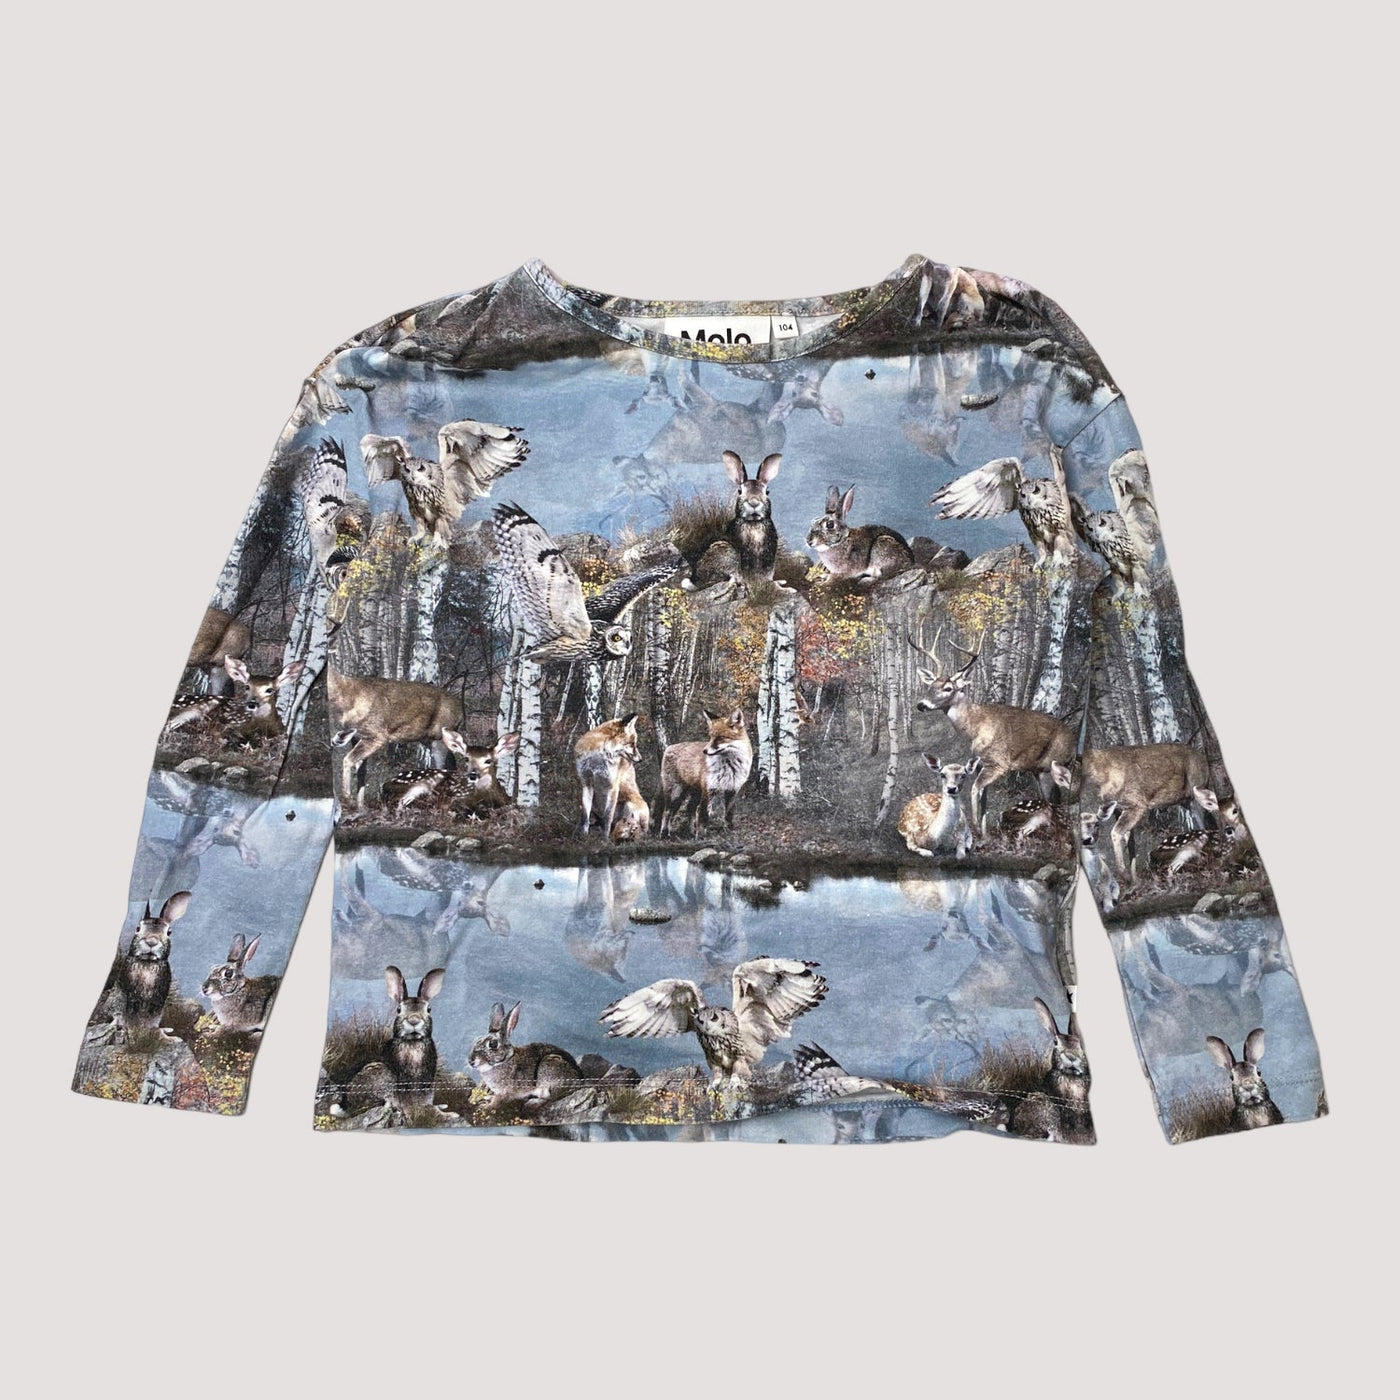 long sleeve, by the forrest lake | 104cm